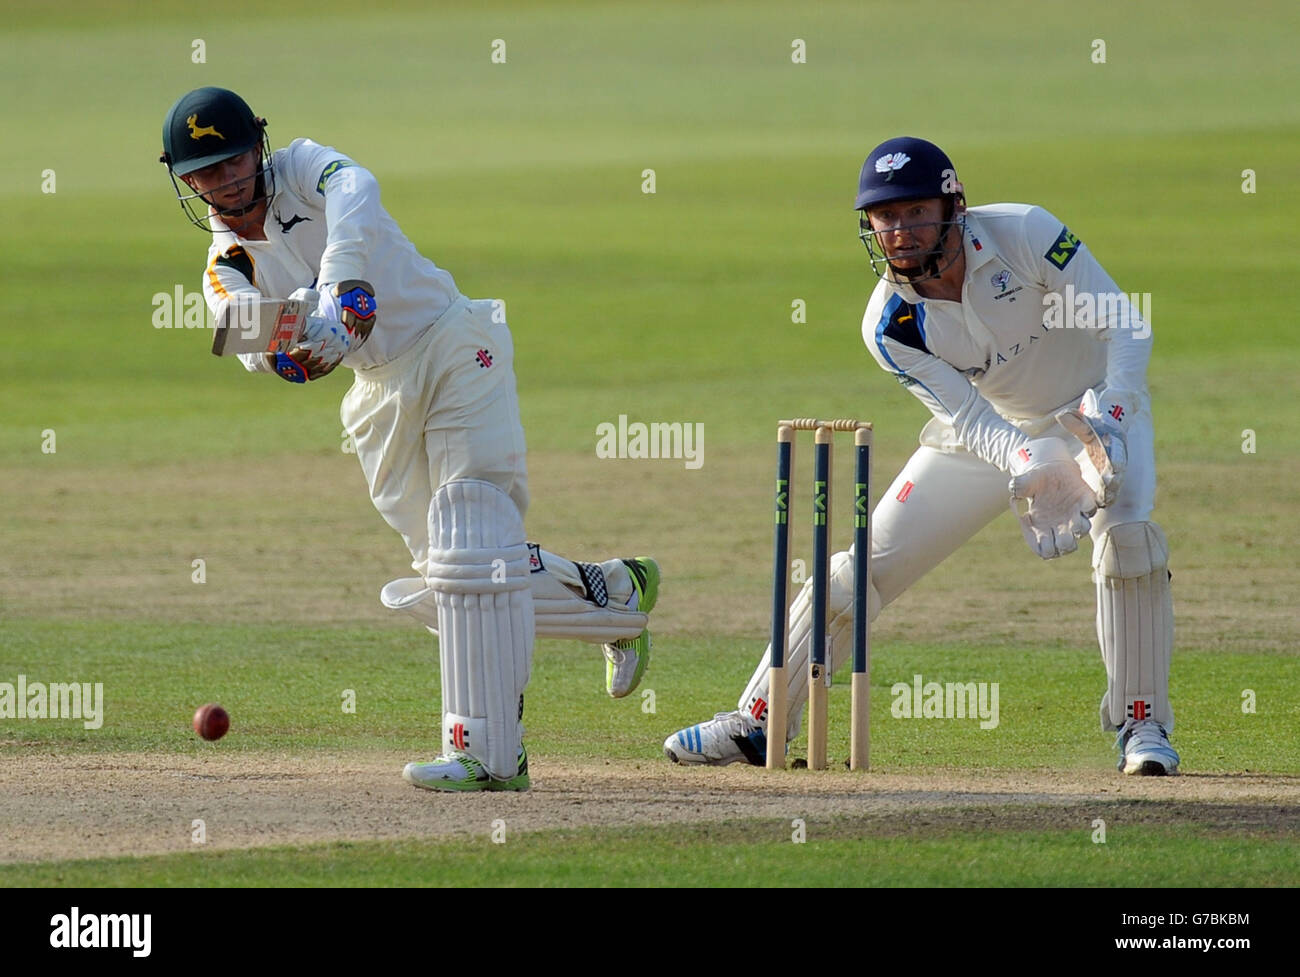 Nottinghamshire's James Taylor bats during day three of the LV= County Championship Division One match at Trent Bridge, Nottingham. SSOCIATION Photo. Picture date: Thursday September 11, 2014. See PA story CRICKET Nottinghamshire. Photo credit should read: Simon Cooper/PA Wire Stock Photo